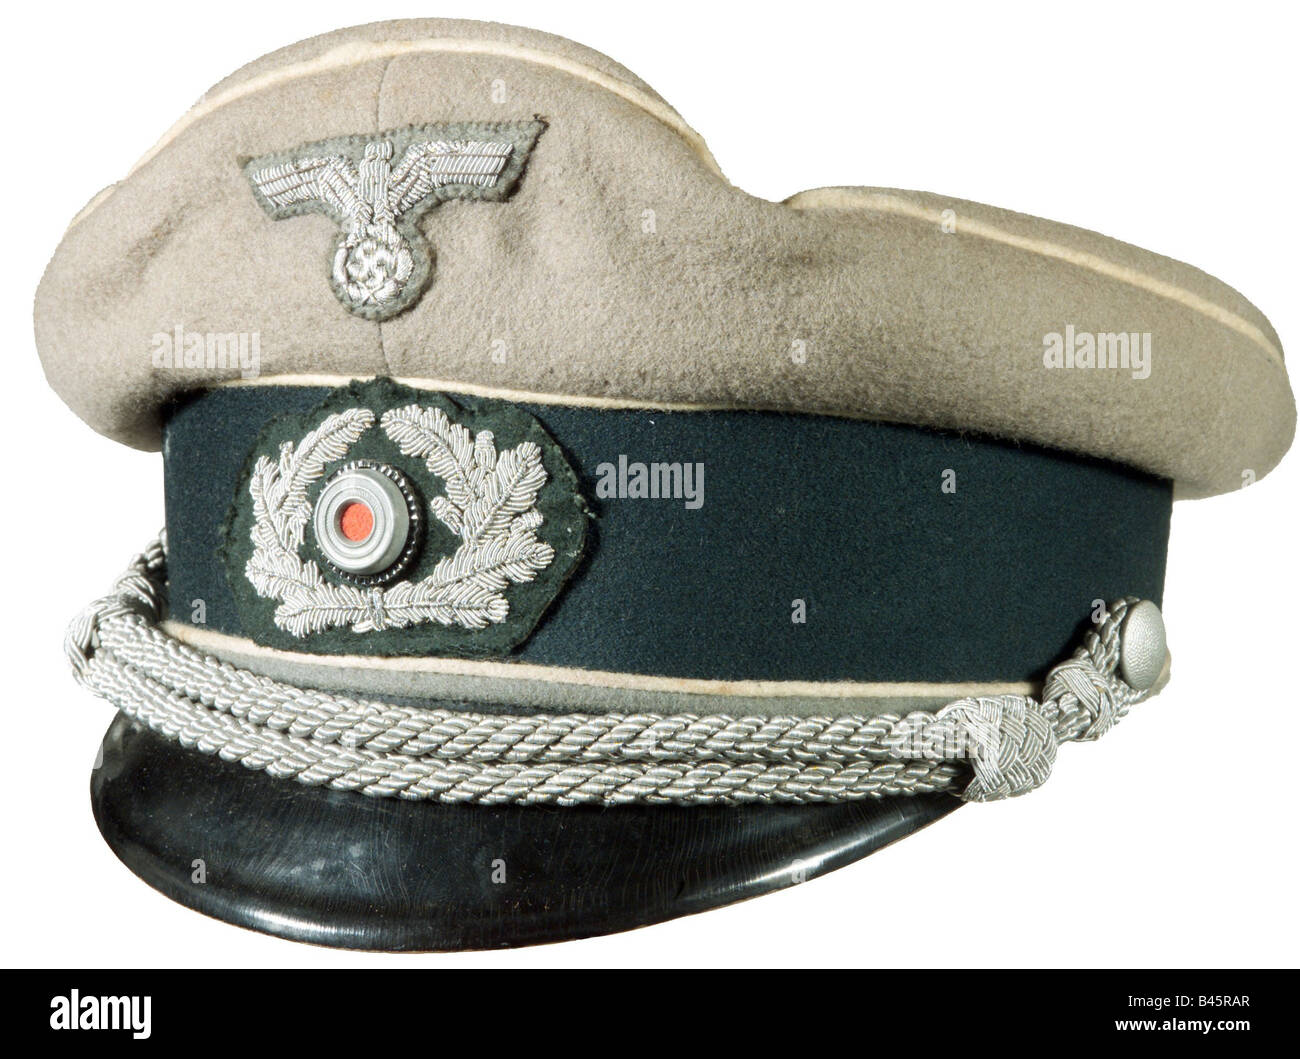 military, uniforms, Germany, cap for officers, army, infantry, 1935 - 1945, Wehrmacht, Third Reich, Second World War, , Stock Photo